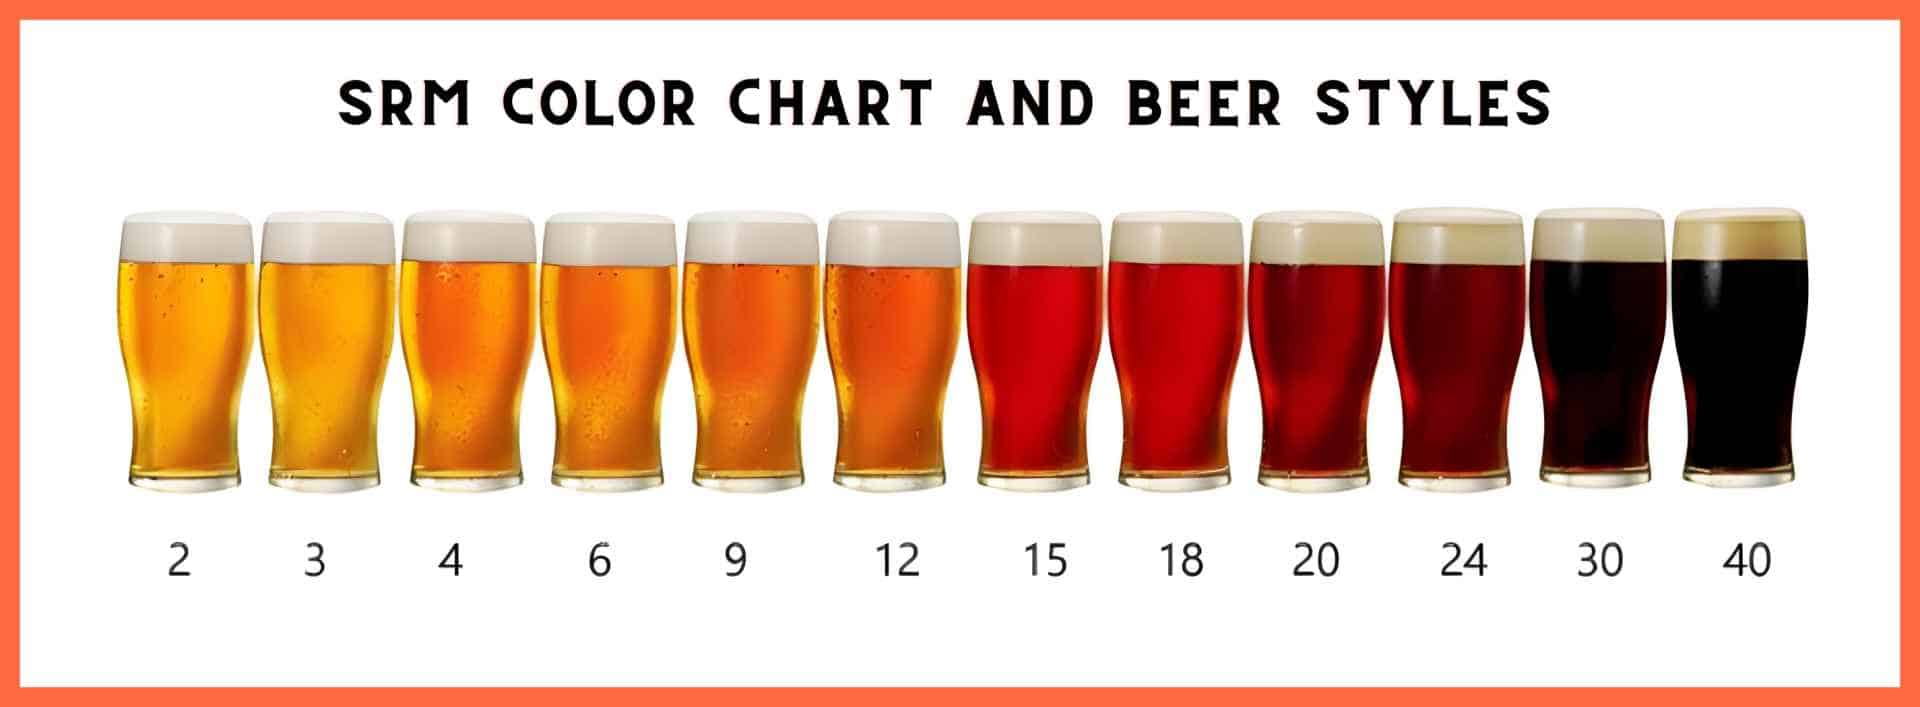 SRM Color Chart and Beer Styles